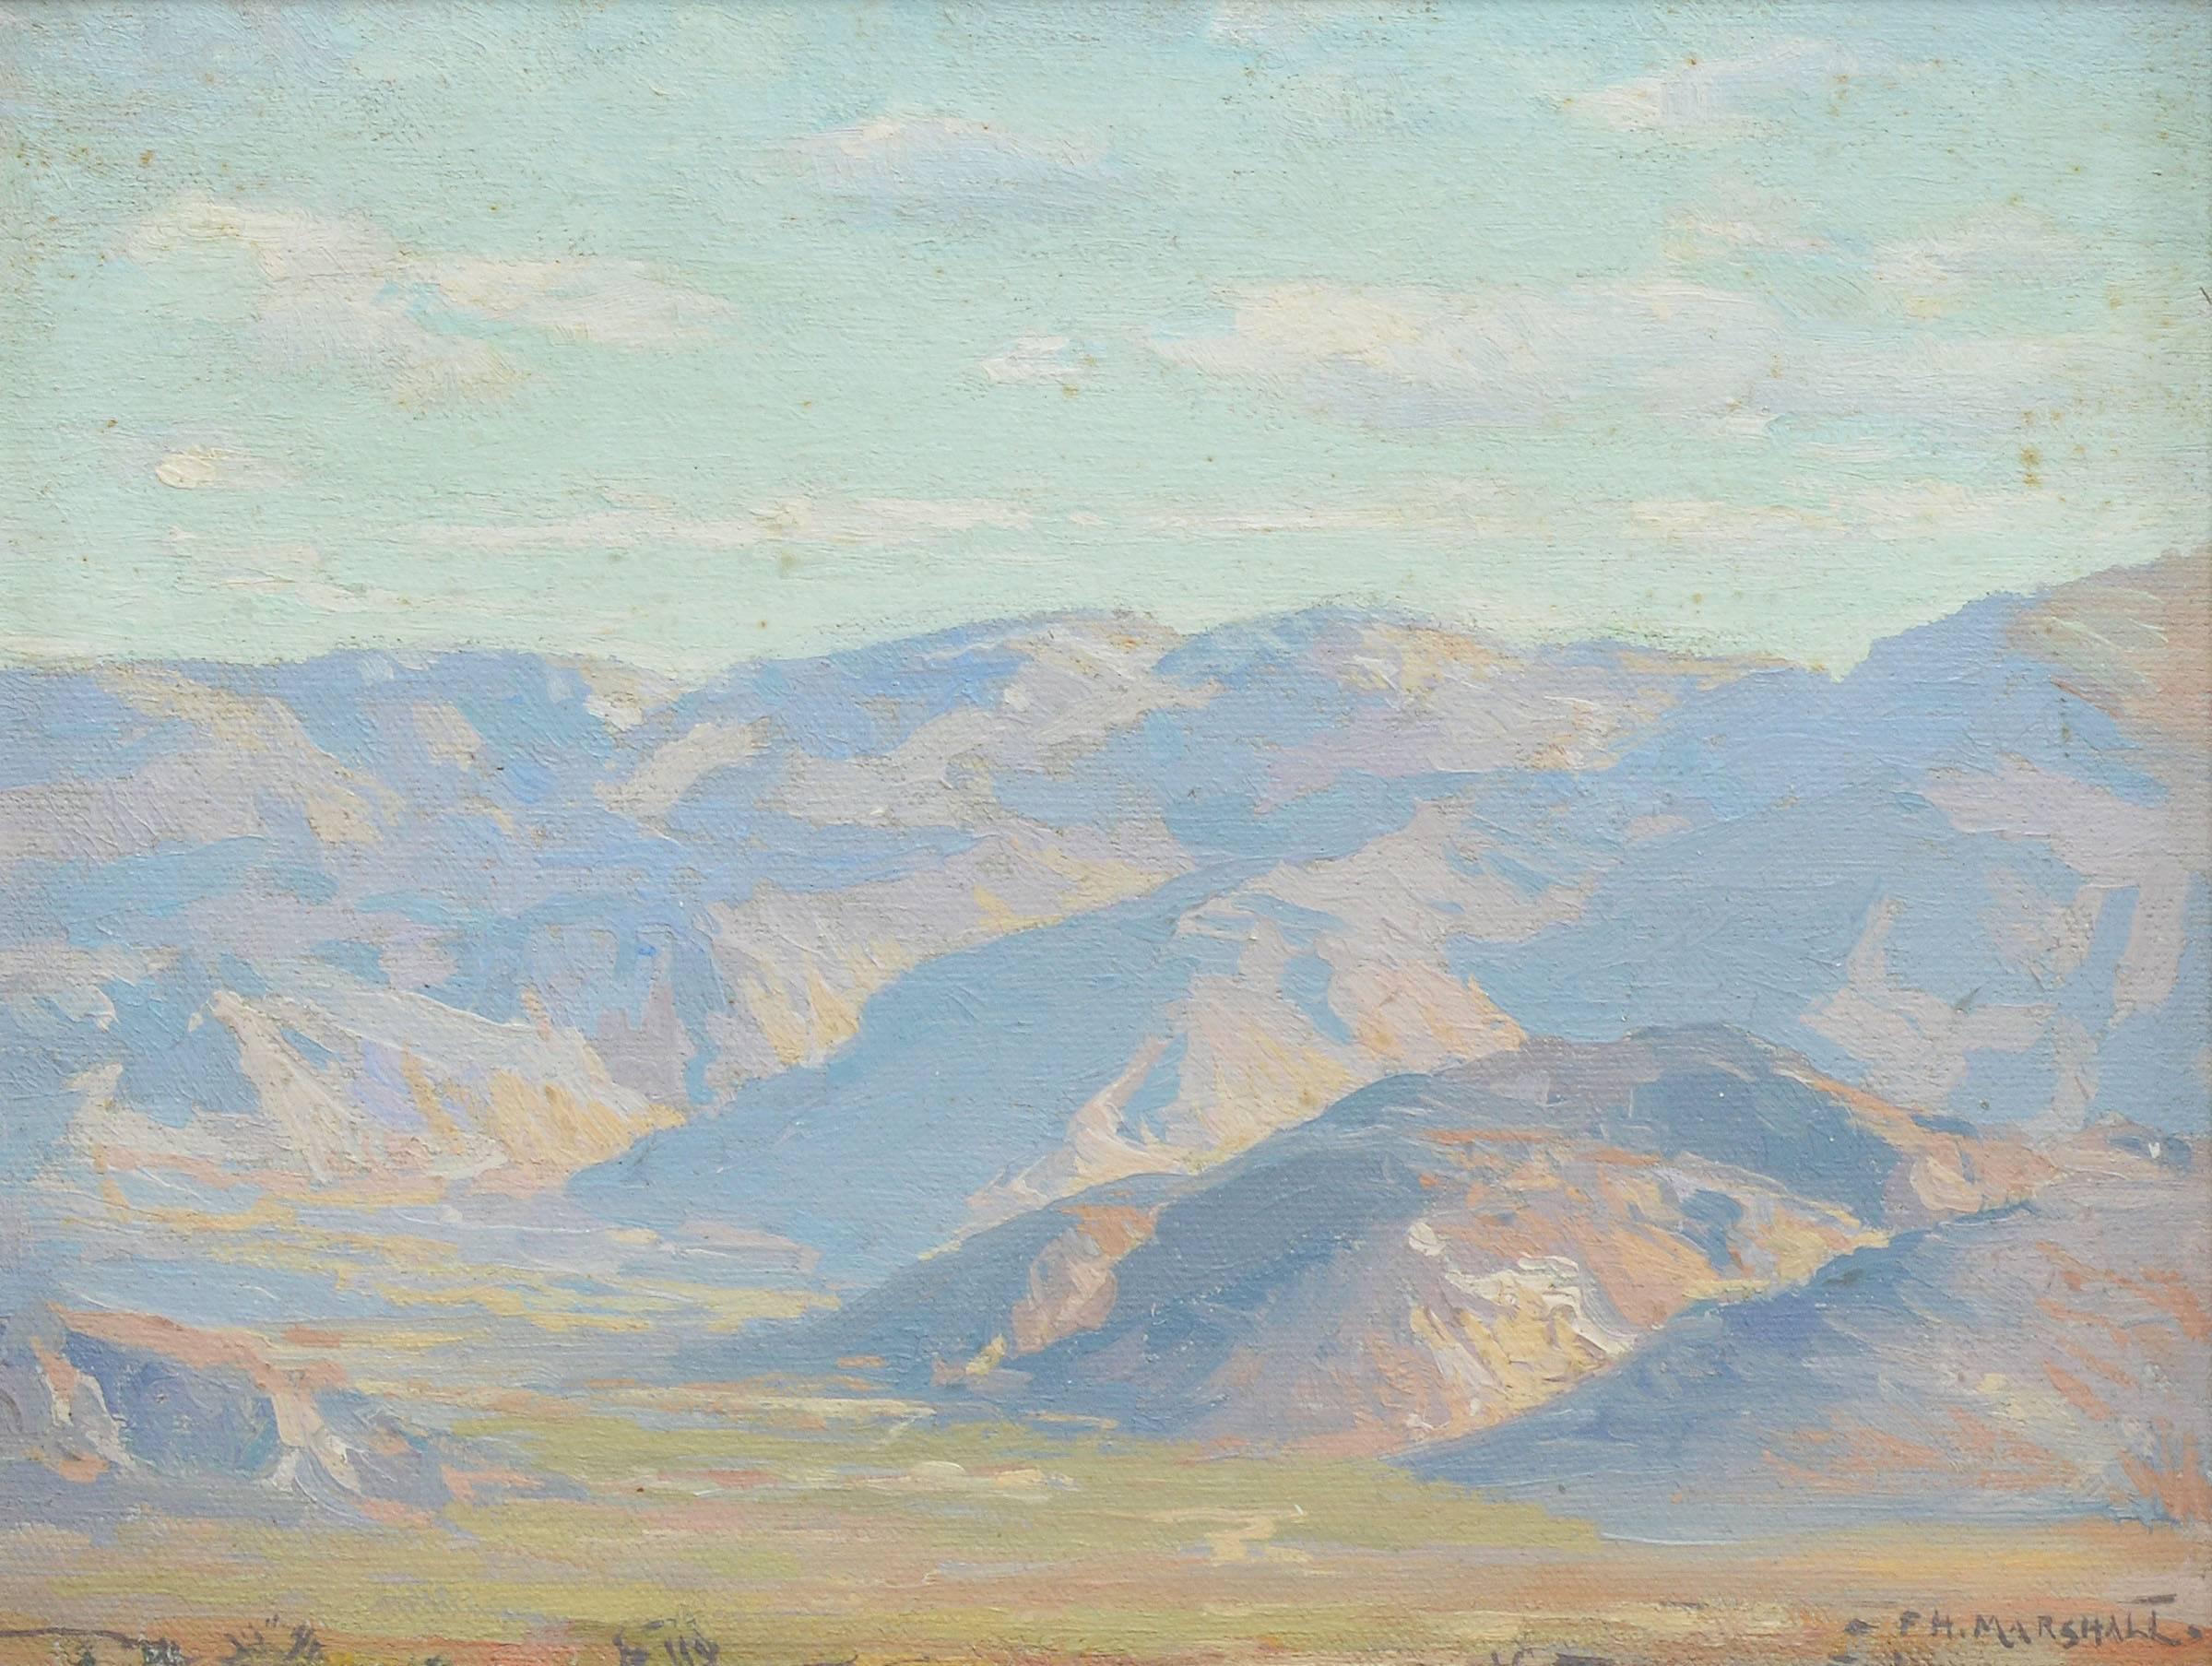 Banning Canyon, California, Plein Aire Impressionist Landscape by Frank Marshall - Gray Landscape Painting by Frank Howard Marshall